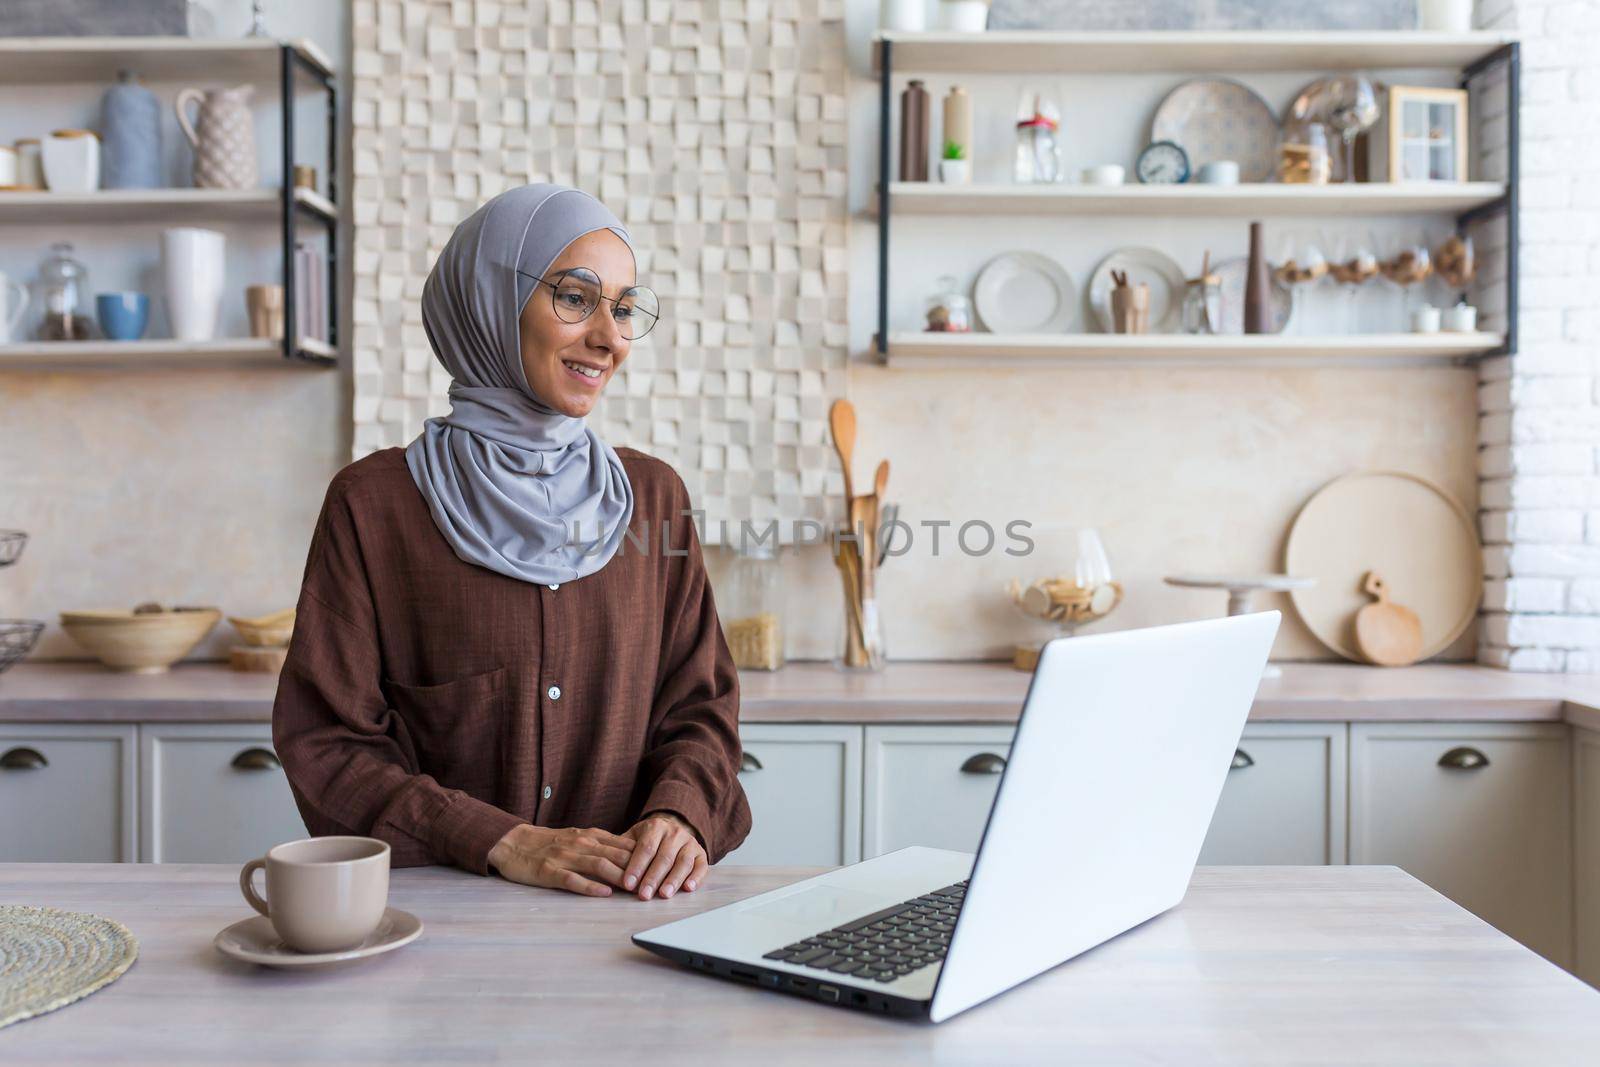 Young beautiful muslim woman in hijab and glasses studying remotely using laptop student woman in kitchen smiling and happy by voronaman